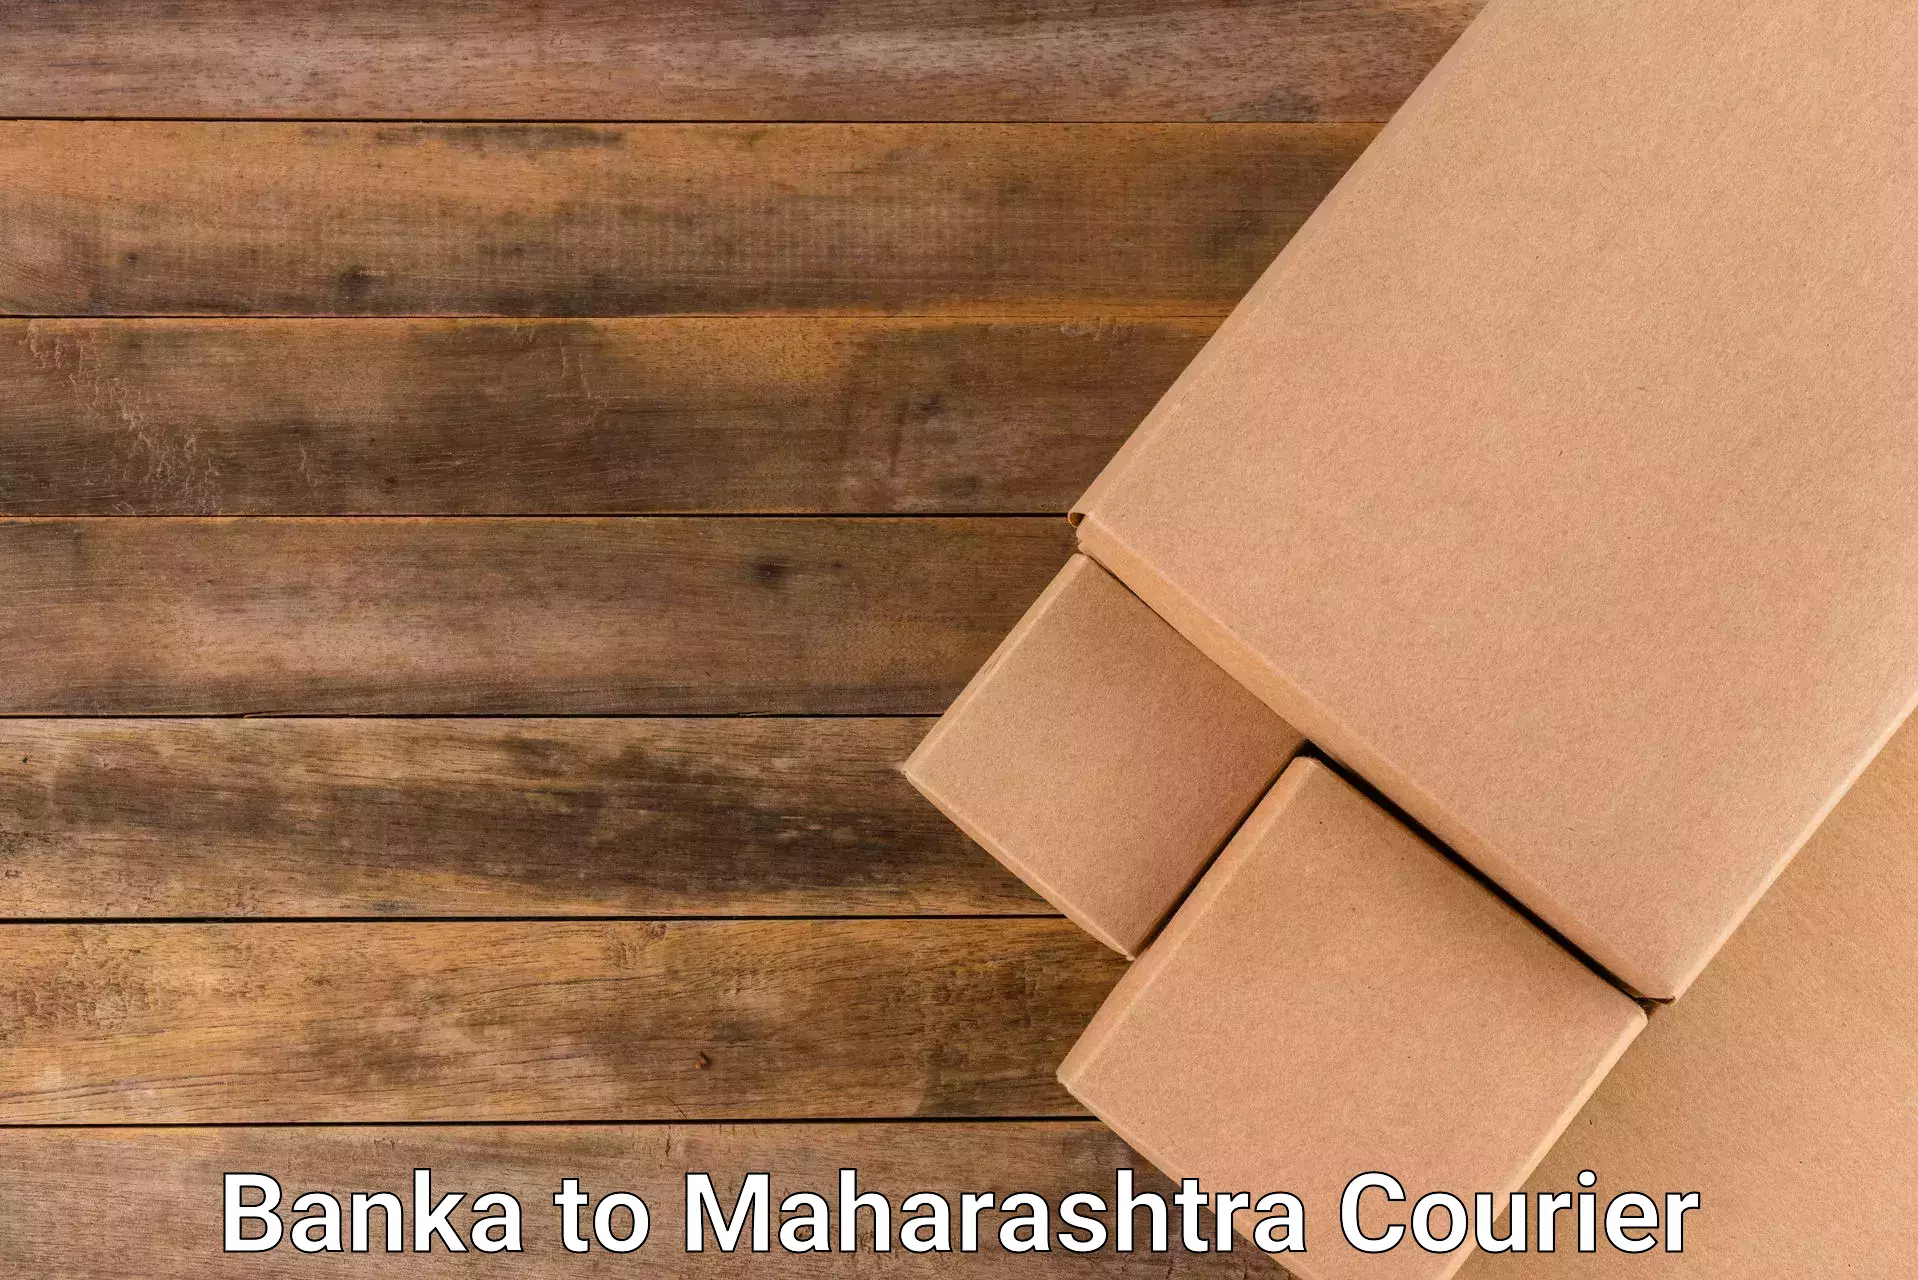 Automated parcel services Banka to Nagpur